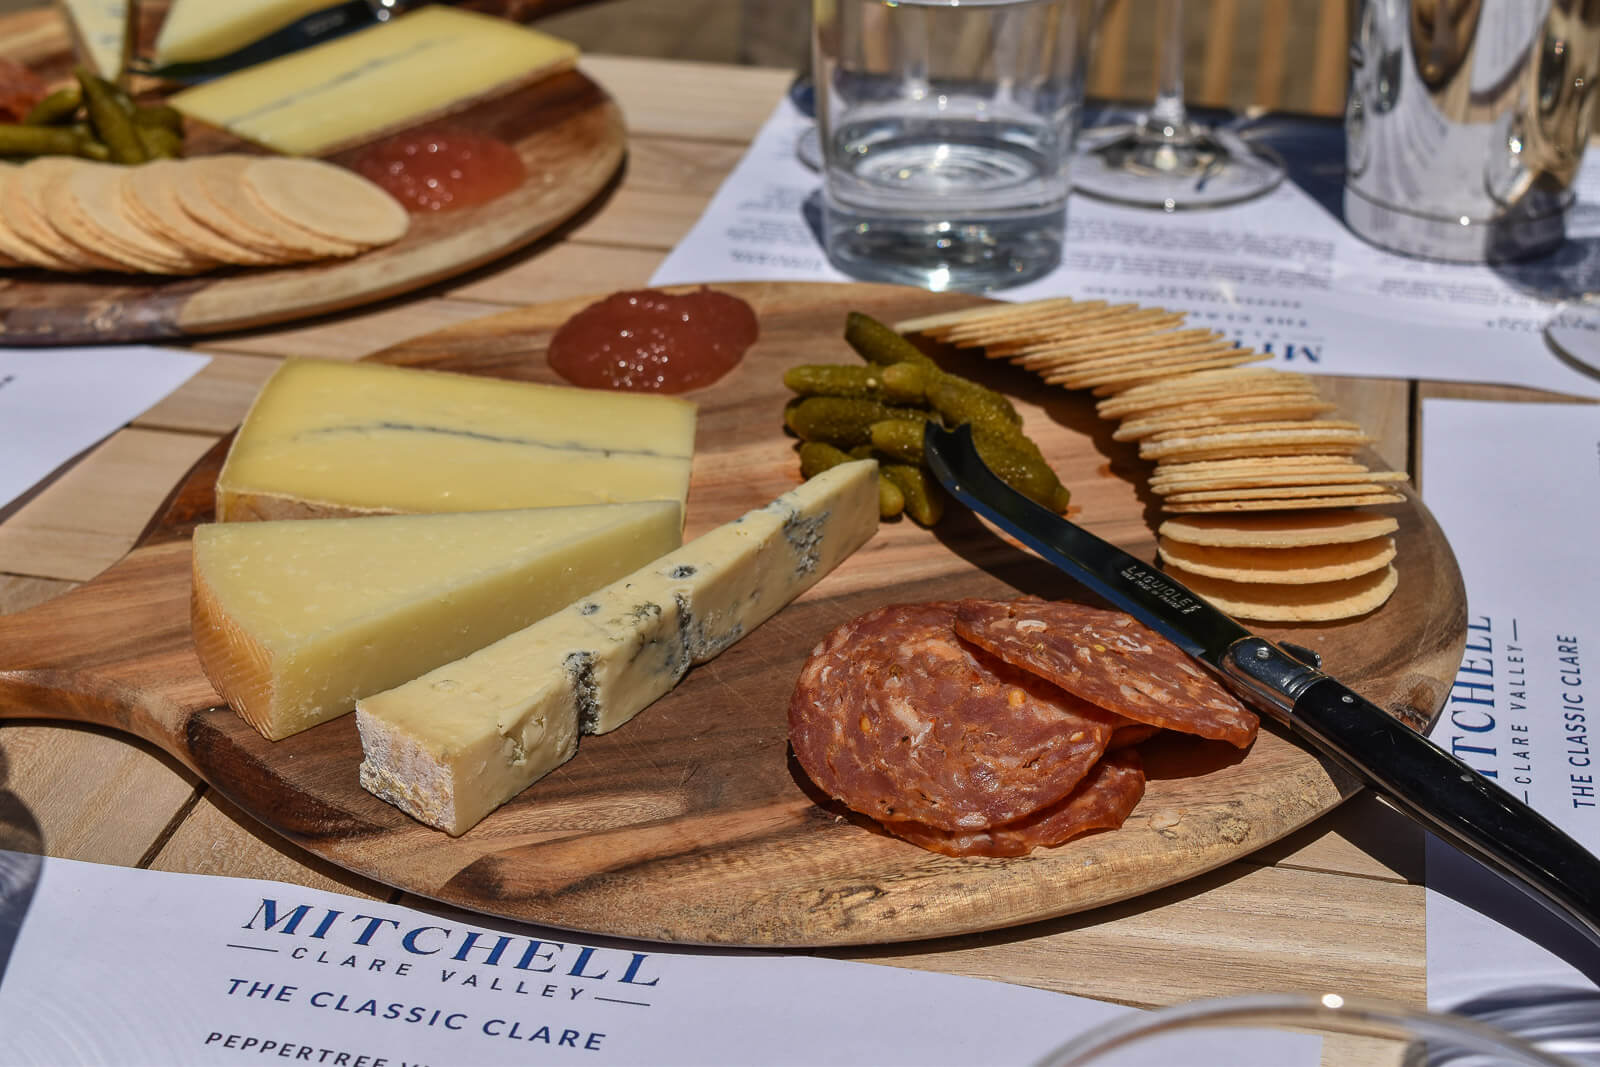 A cheese and charcuterie platter